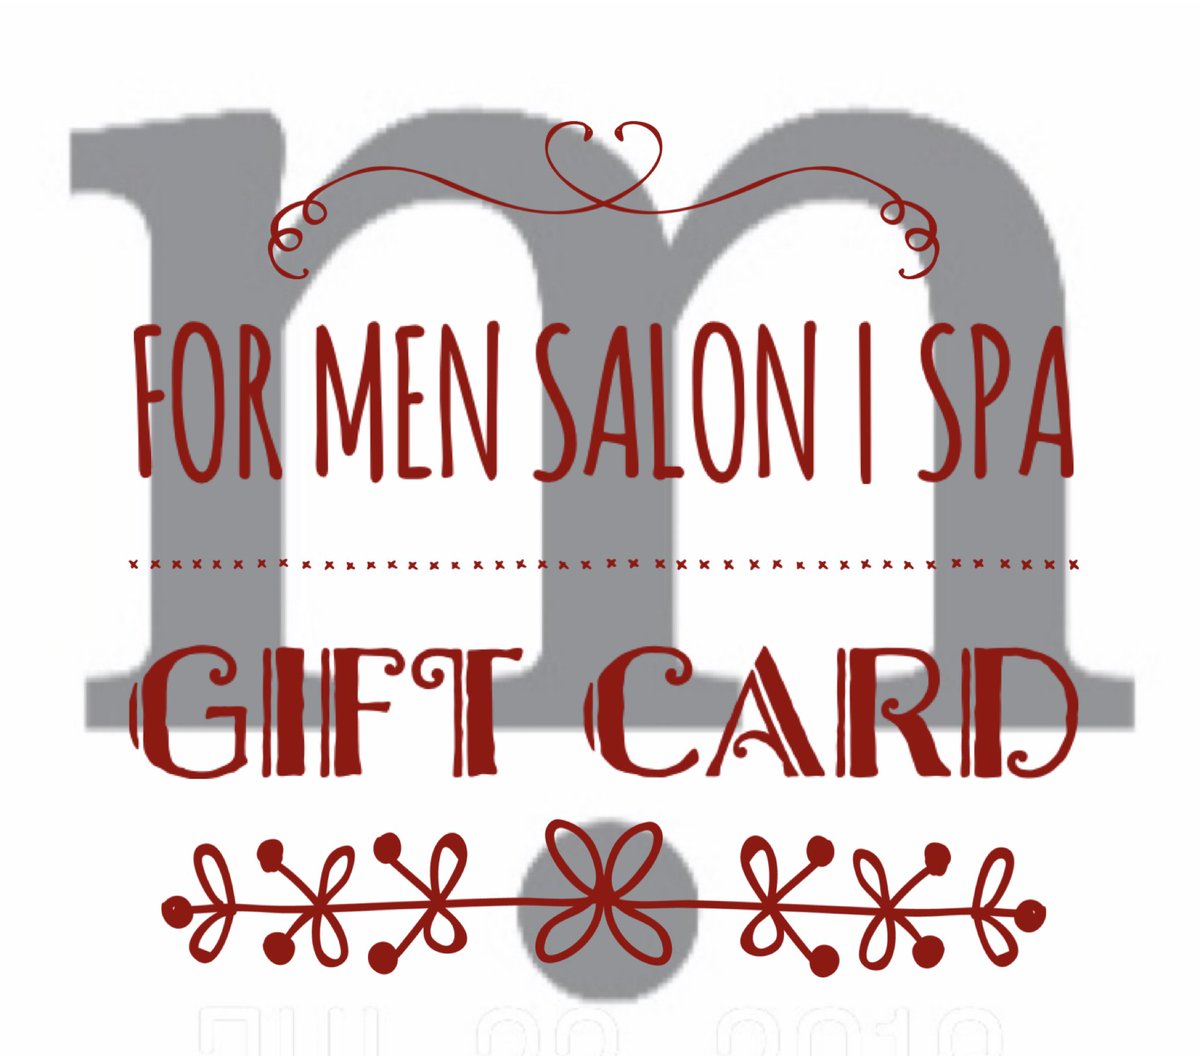 There’s still time to give that special someone the #uniquegifts of #mensgrooming from FOR MEN Salon and Spa. Available online at:

metroformen.com/shop/gift-card…

#metroformen #menssalon #valentinesdaygift #valentinesday #giftsforhim